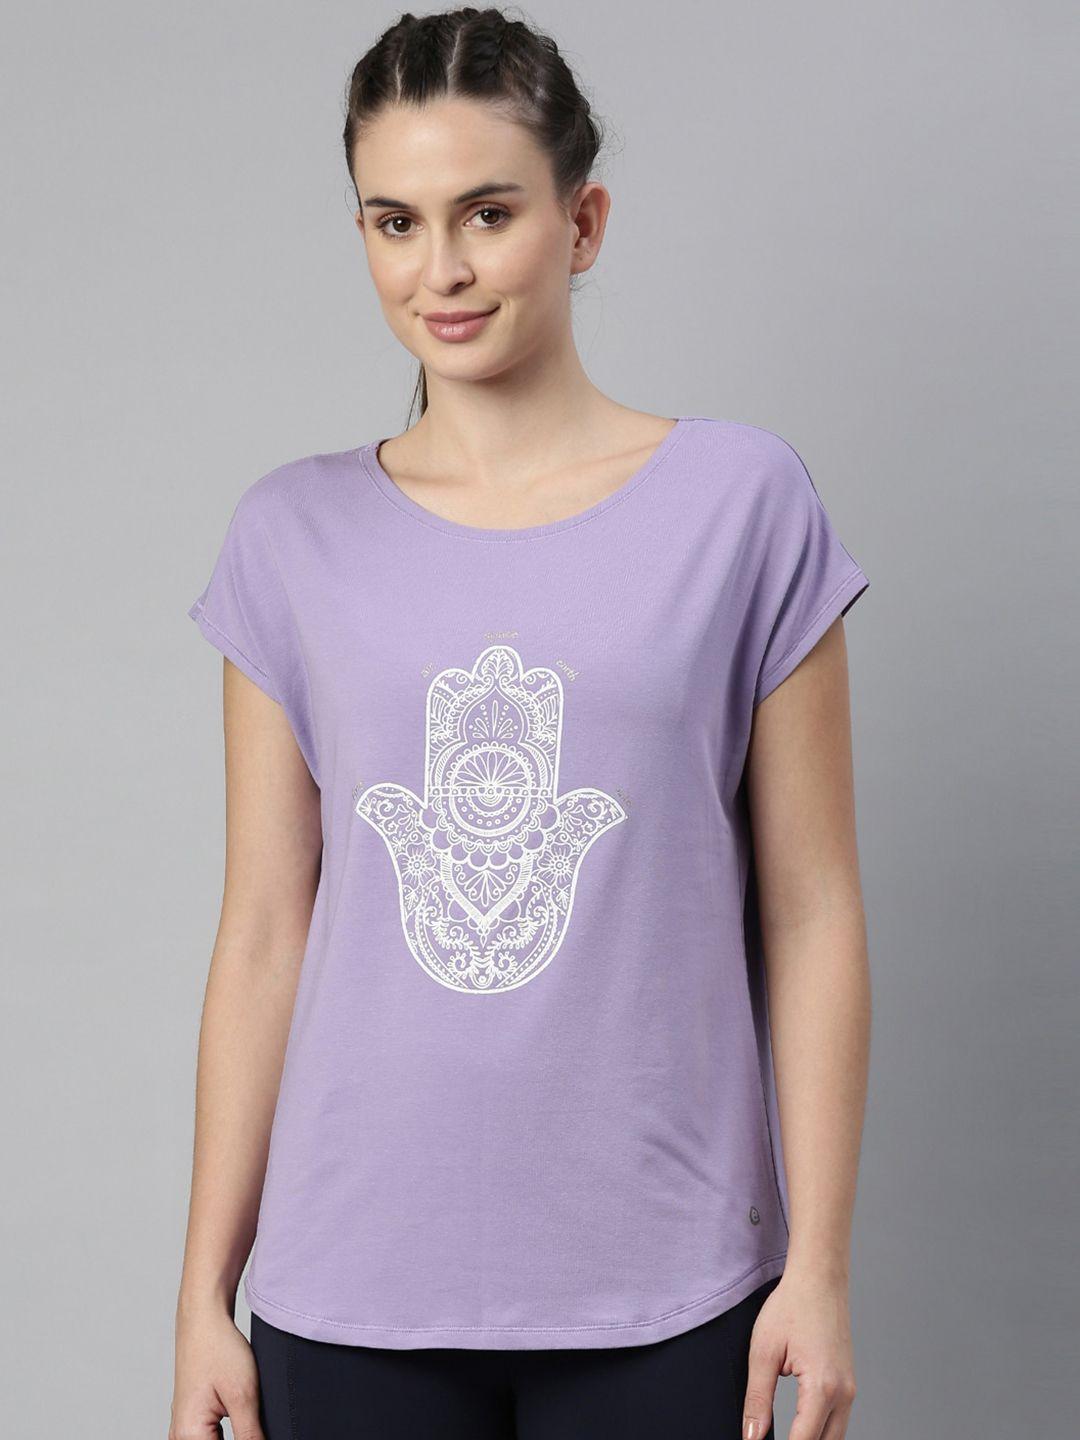 enamor-women-lavender-graphic-printed-relaxed-fit-extended-sleeves-antimicrobial-t-shirt